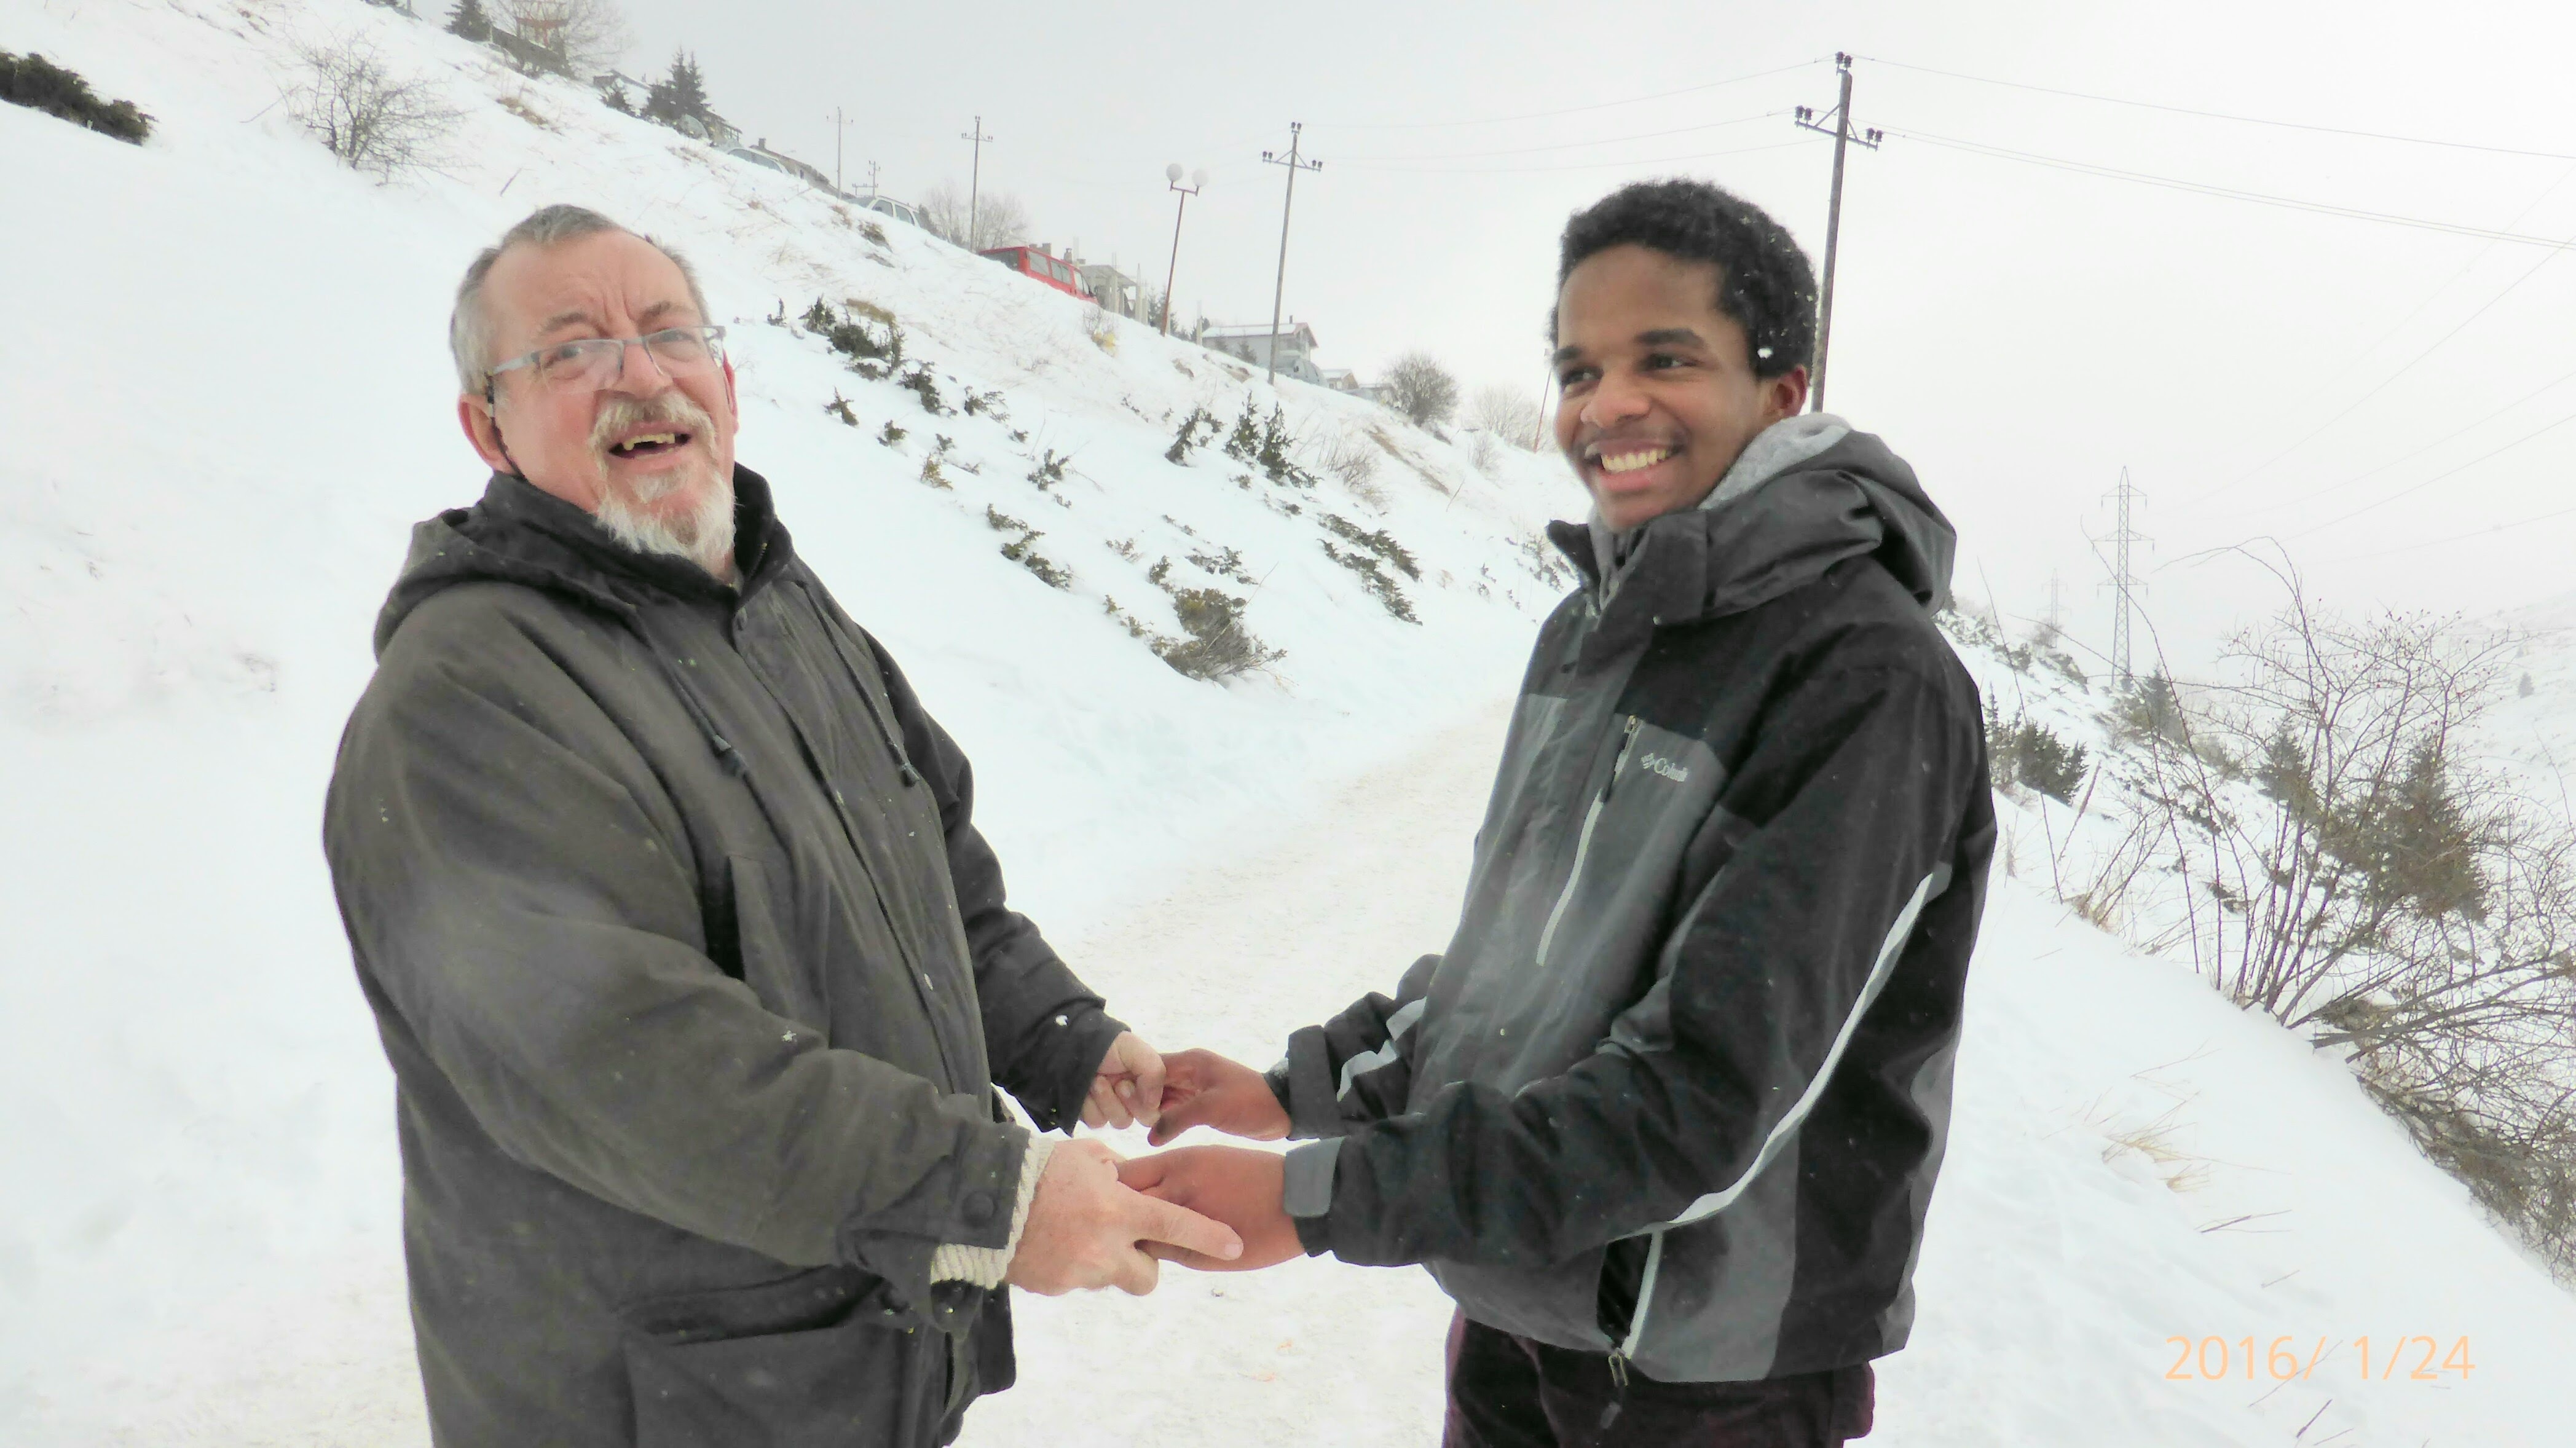 Maxwell holding hands with his host father smiling in the snow